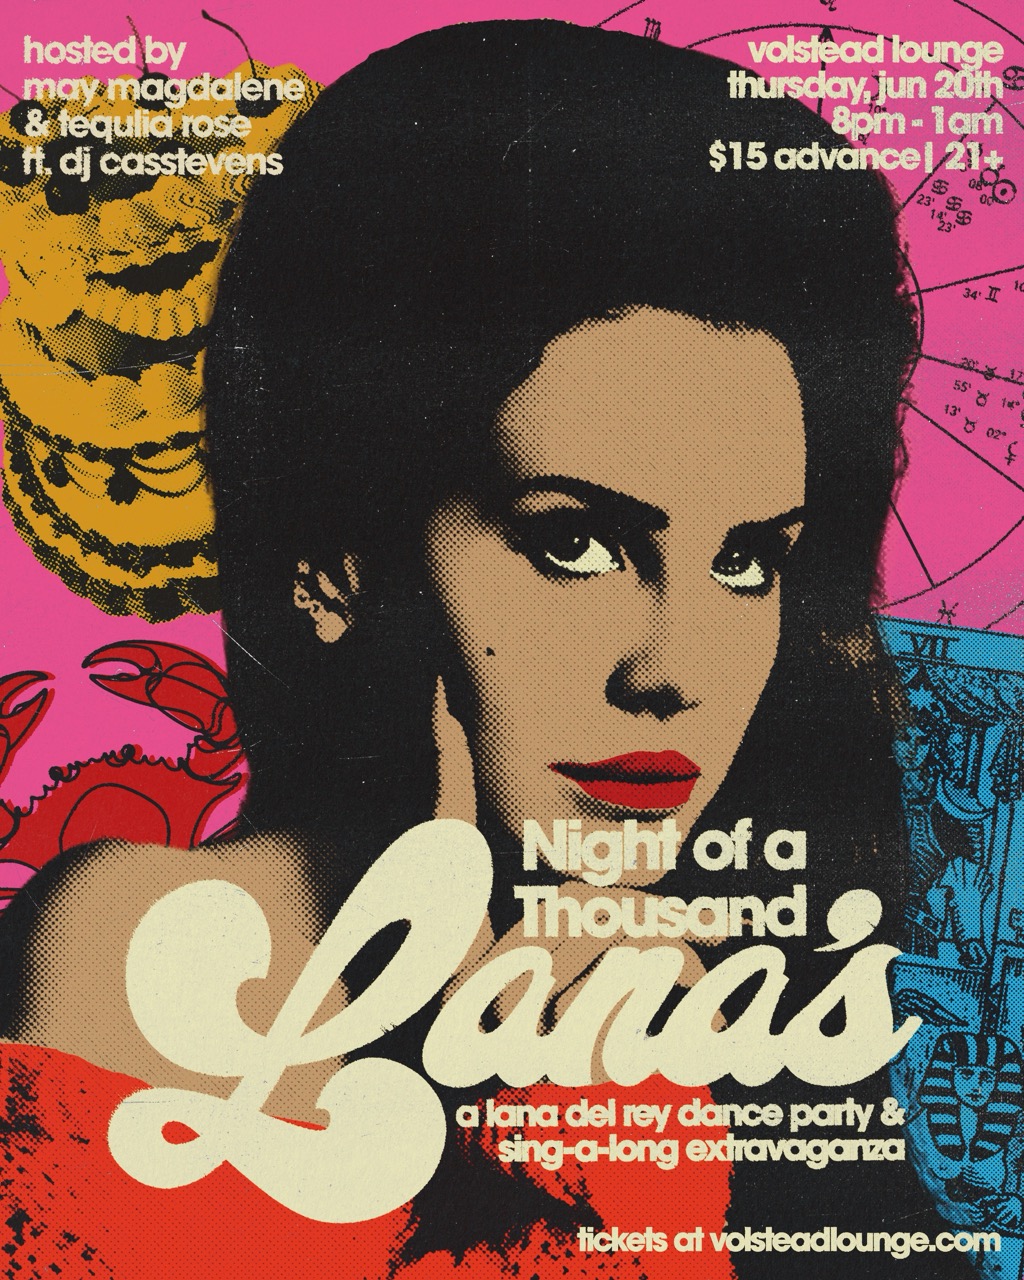 Night of A Thousand Lana's: a Lana Del Rey Dance Party & Sing-A-Long Birthday Extravaganza @ Volstead Lounge